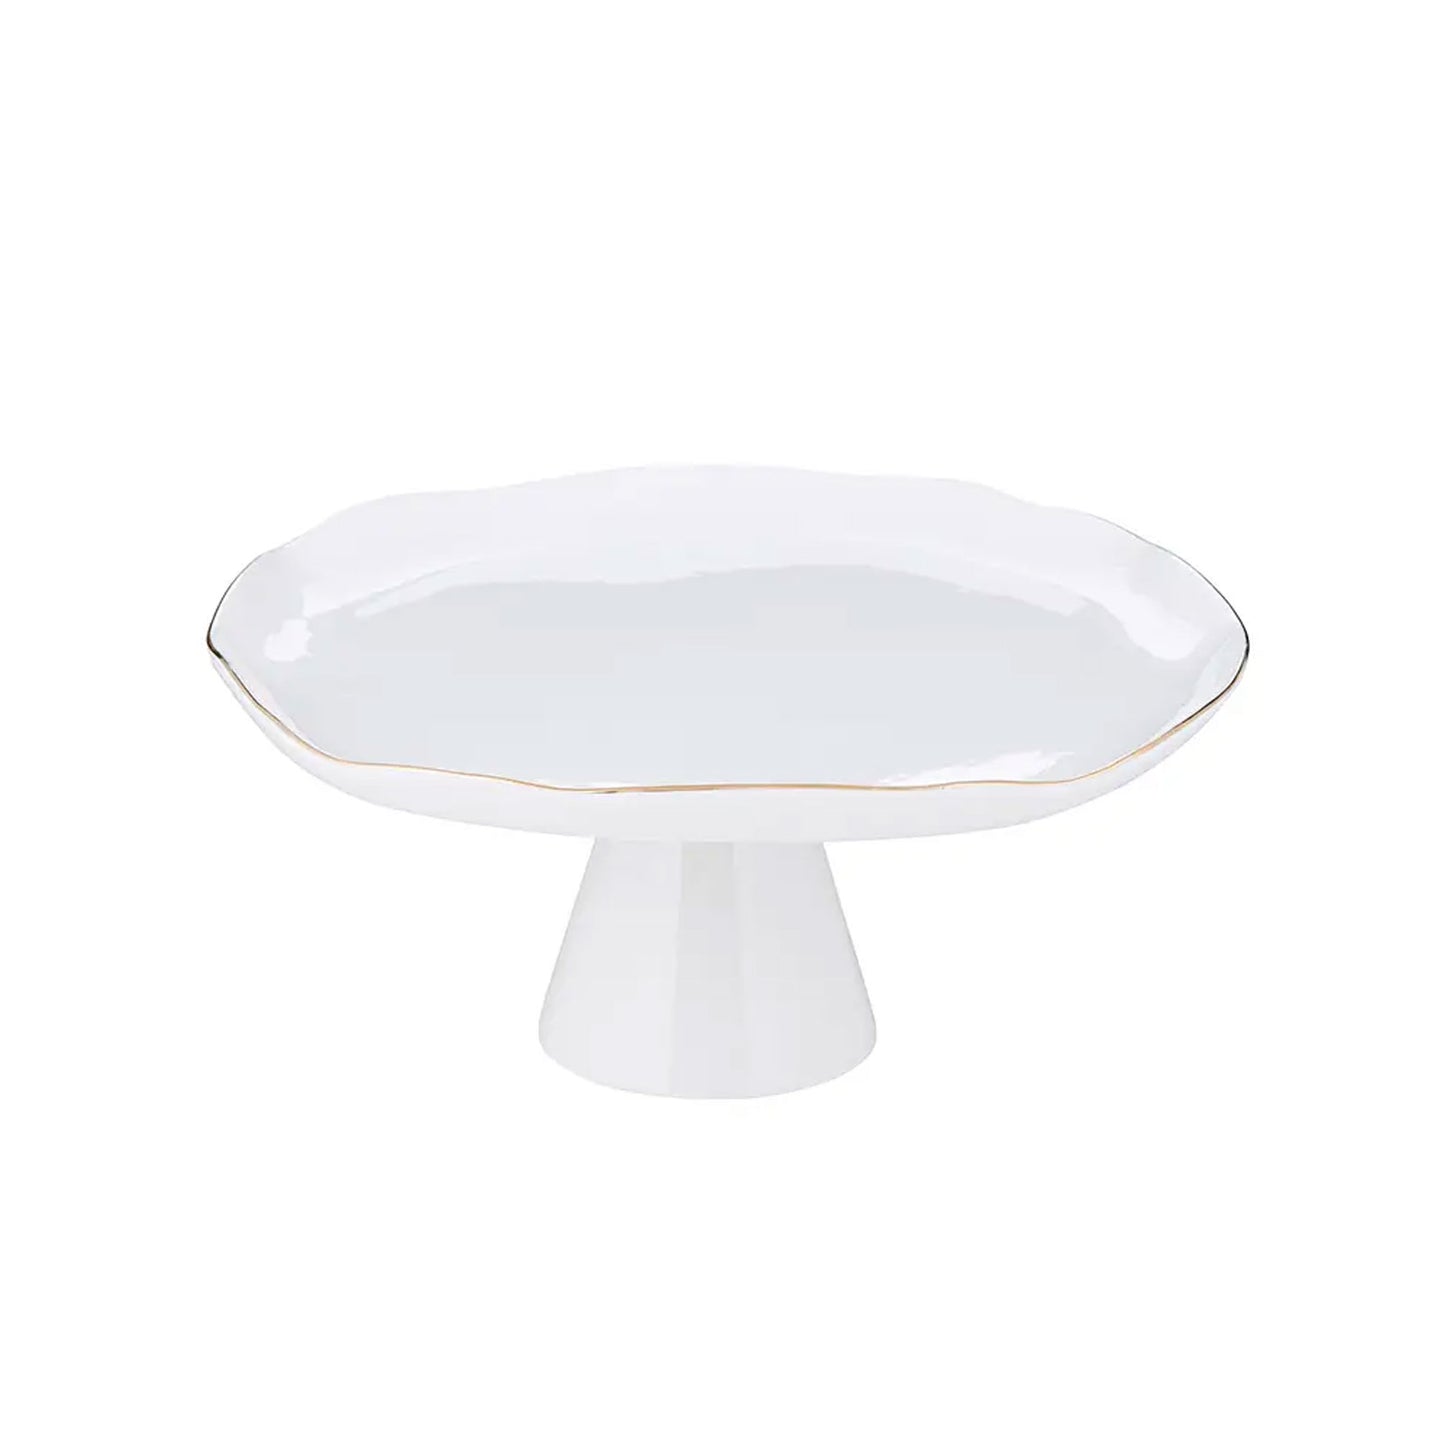 Pedestal Tray in White with Gold Rim